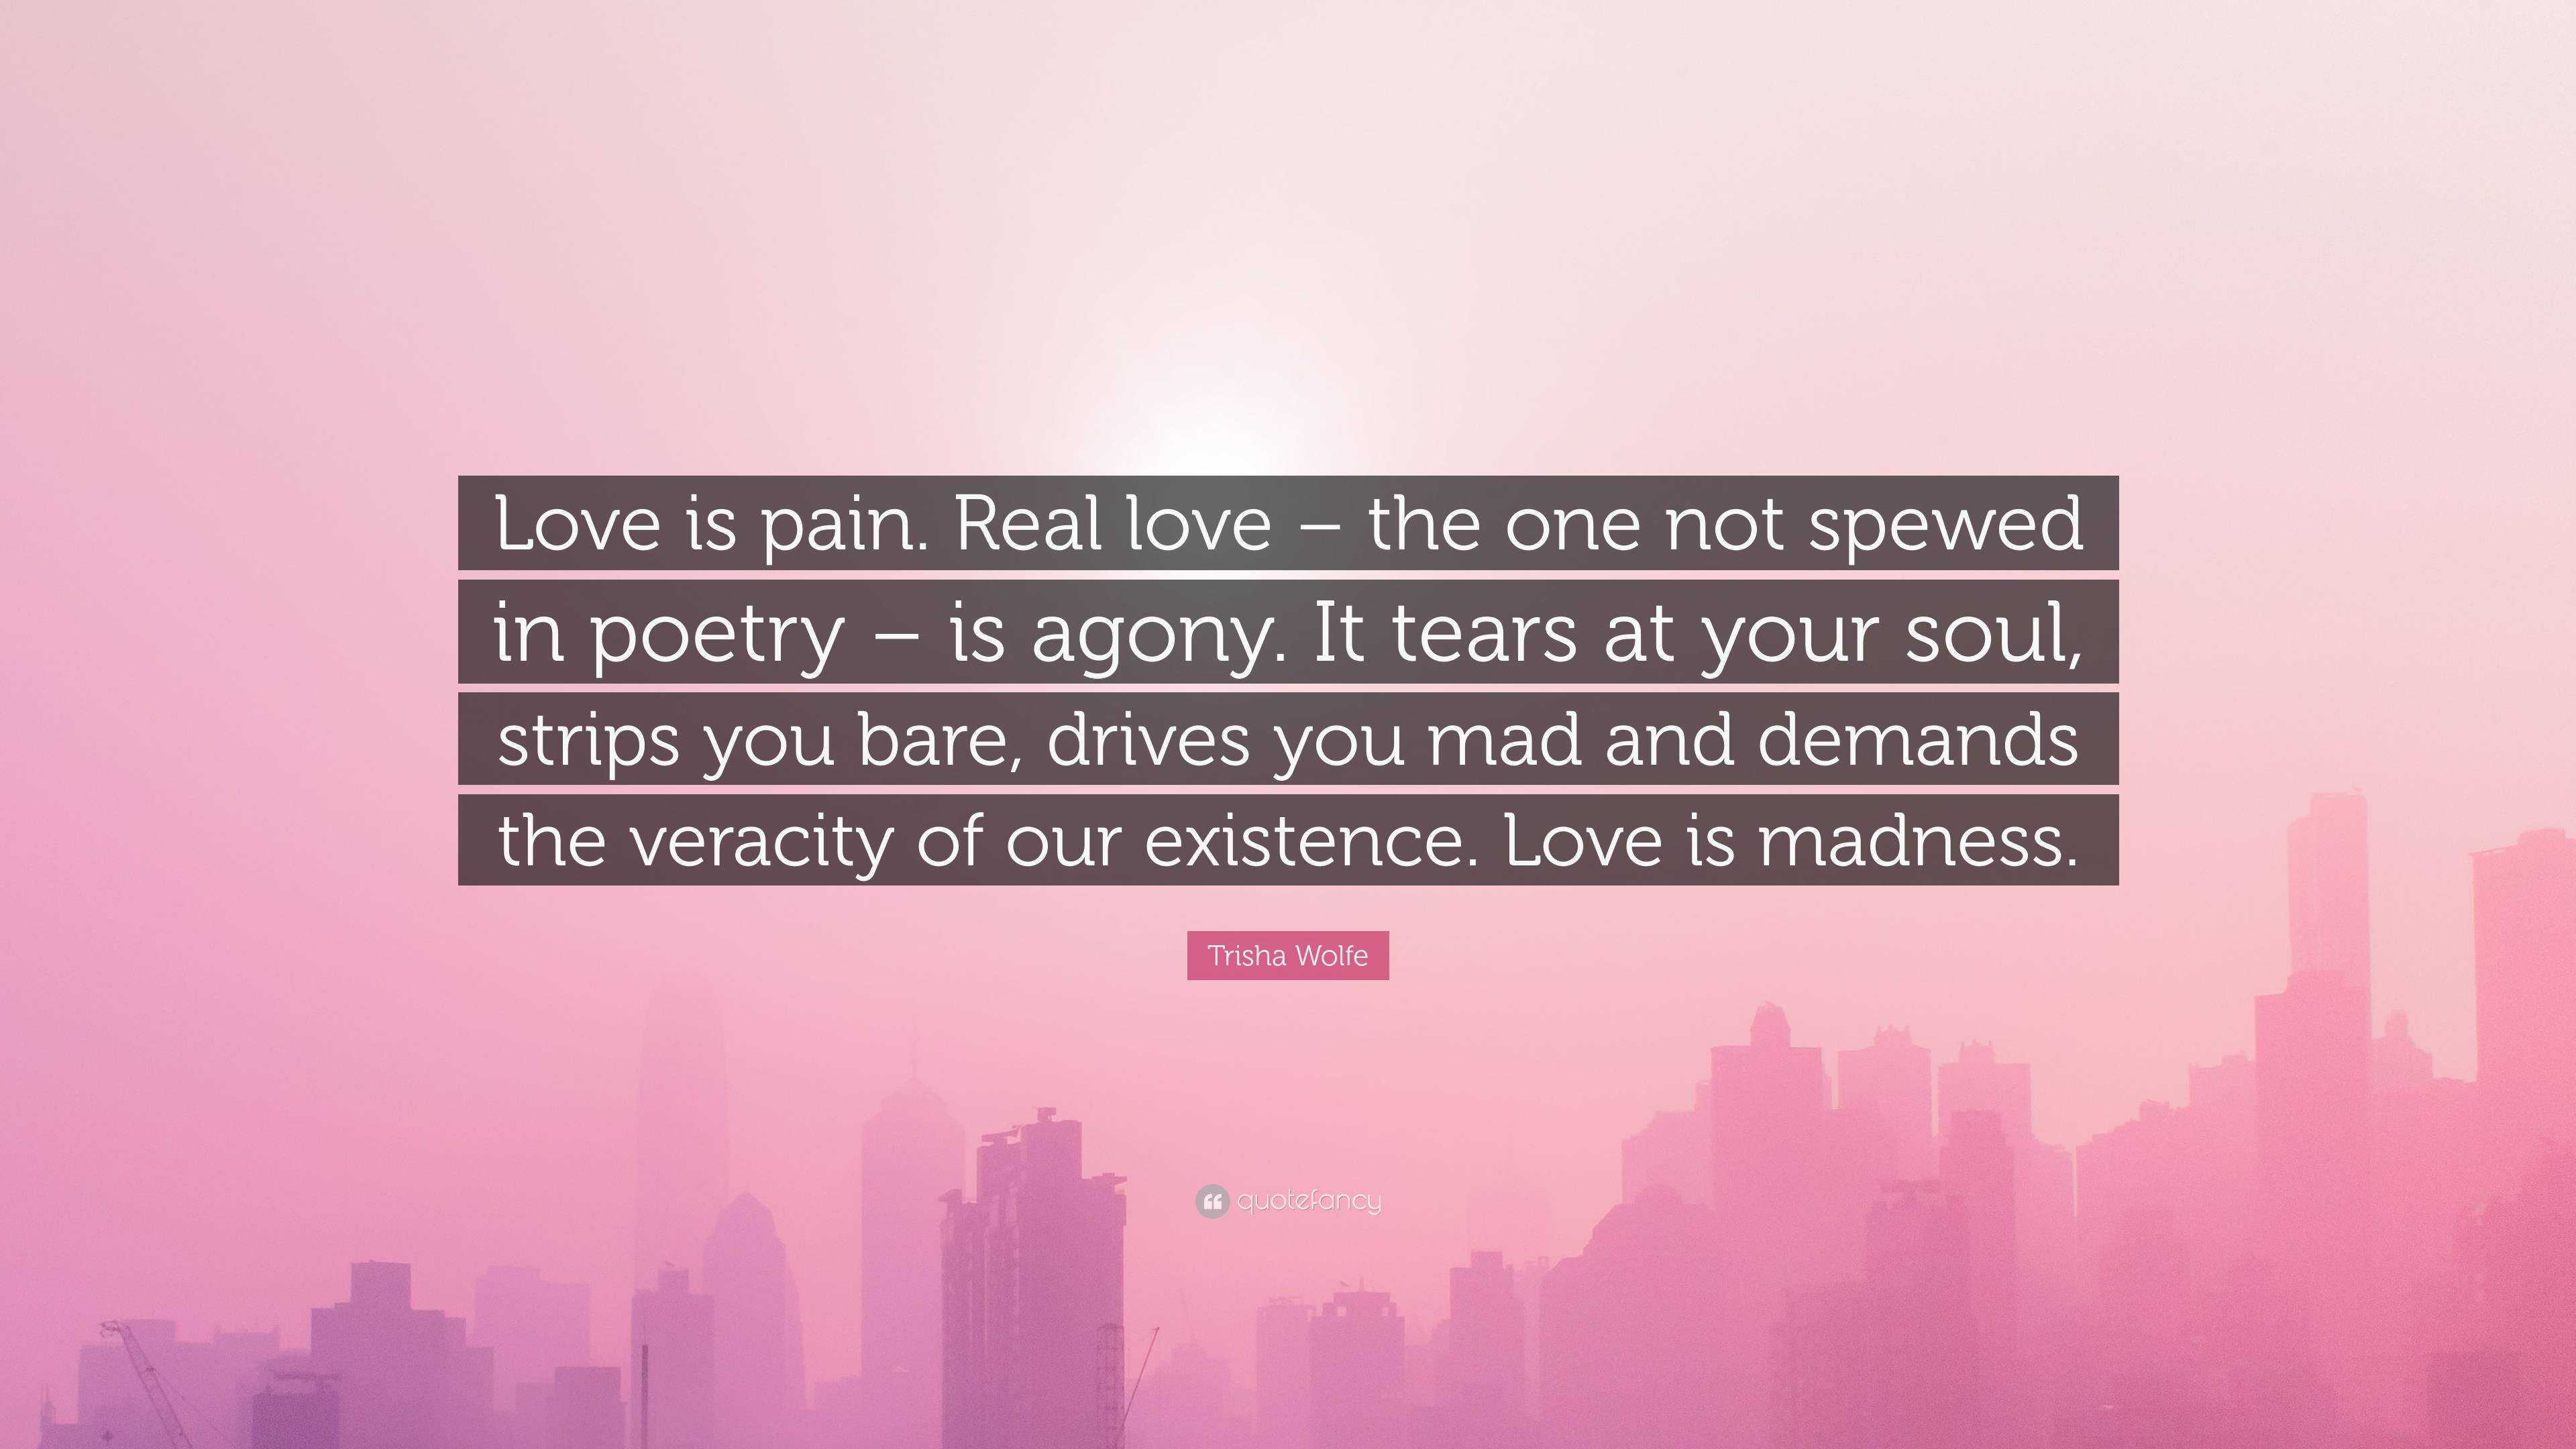 https://quotefancy.com/media/wallpaper/3840x2160/6656719-Trisha-Wolfe-Quote-Love-is-pain-Real-love-the-one-not-spewed-in.jpg